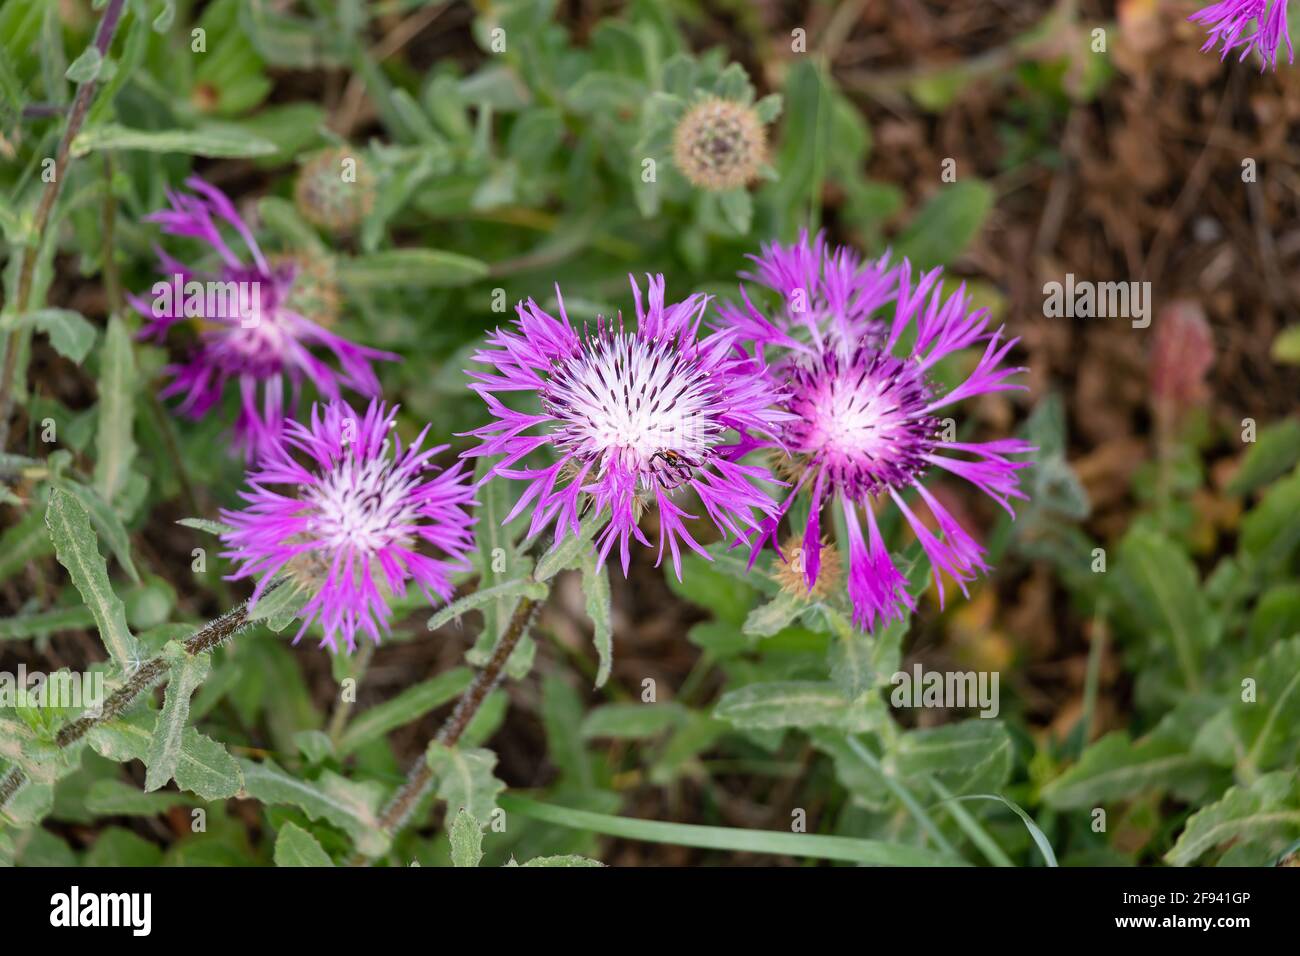 Centaurea sphaerocephala is a species of Centaurea found in the Iberian Peninsula. Only the central flower is in focus with shallow deep of field Stock Photo